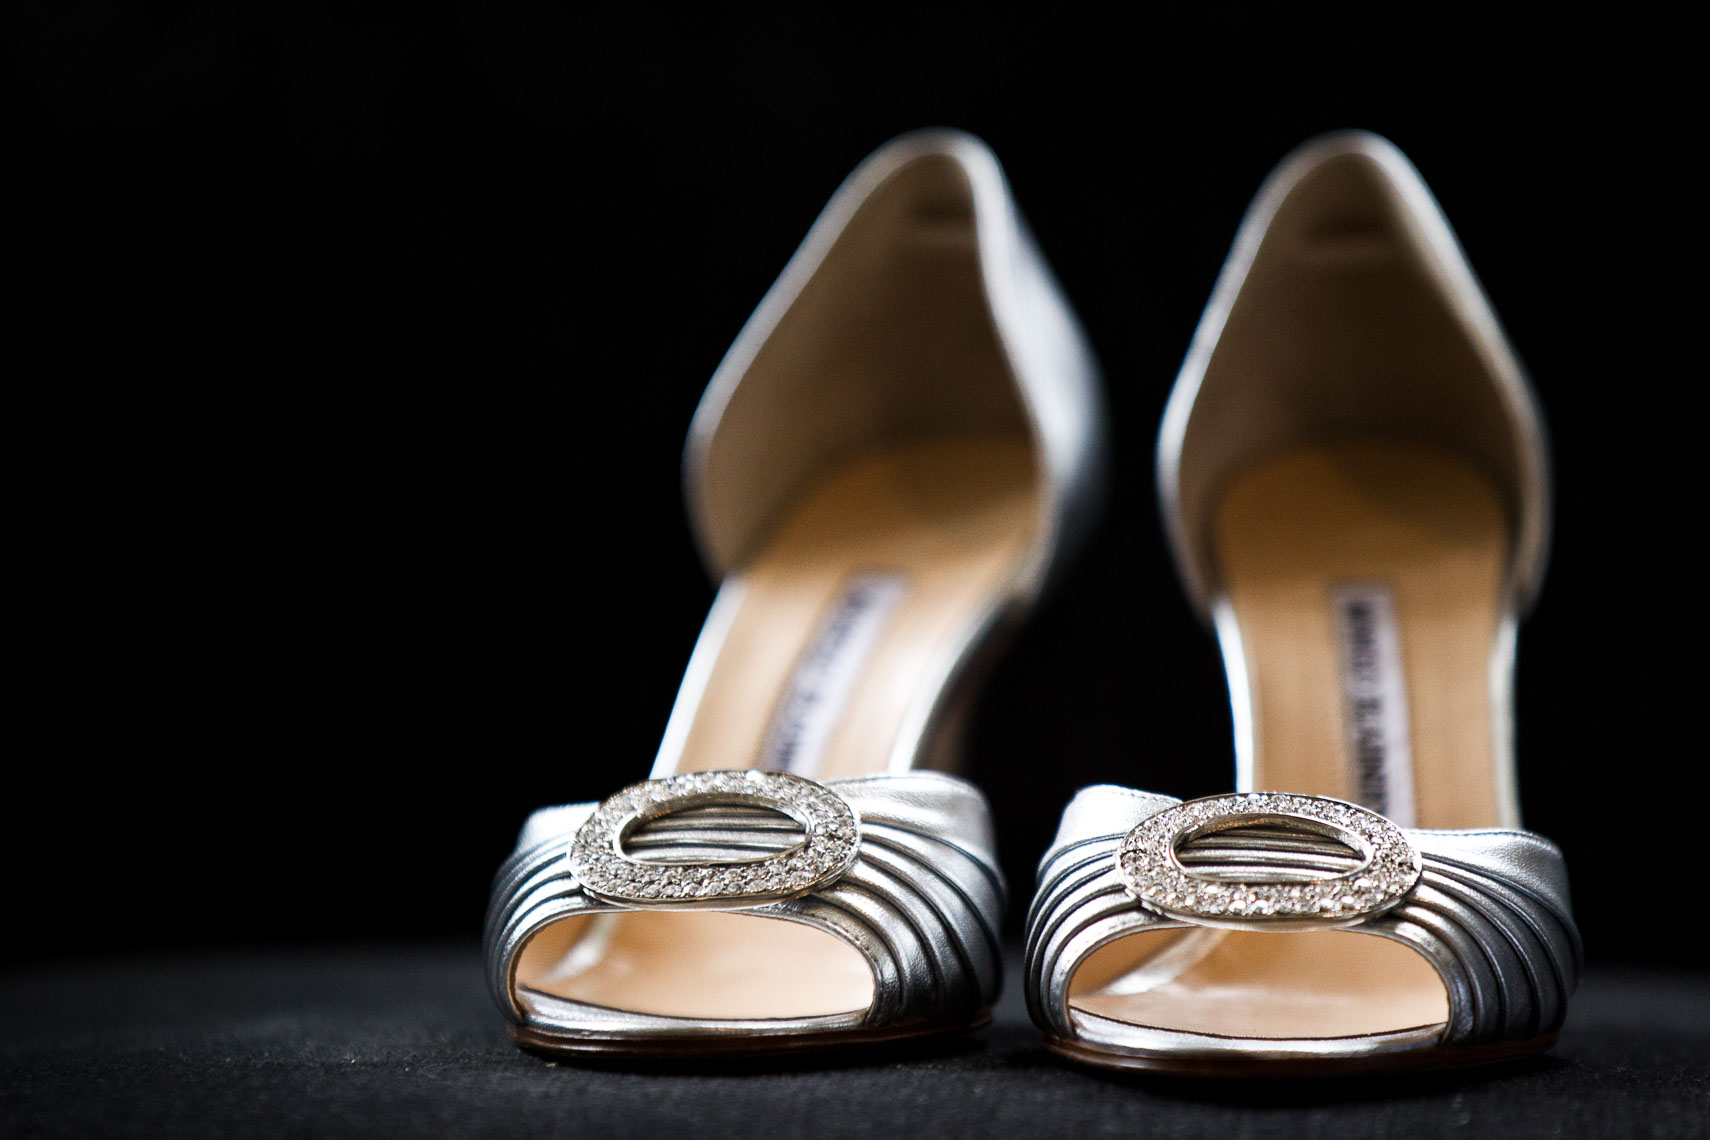 Silver bridal shoes on a black background